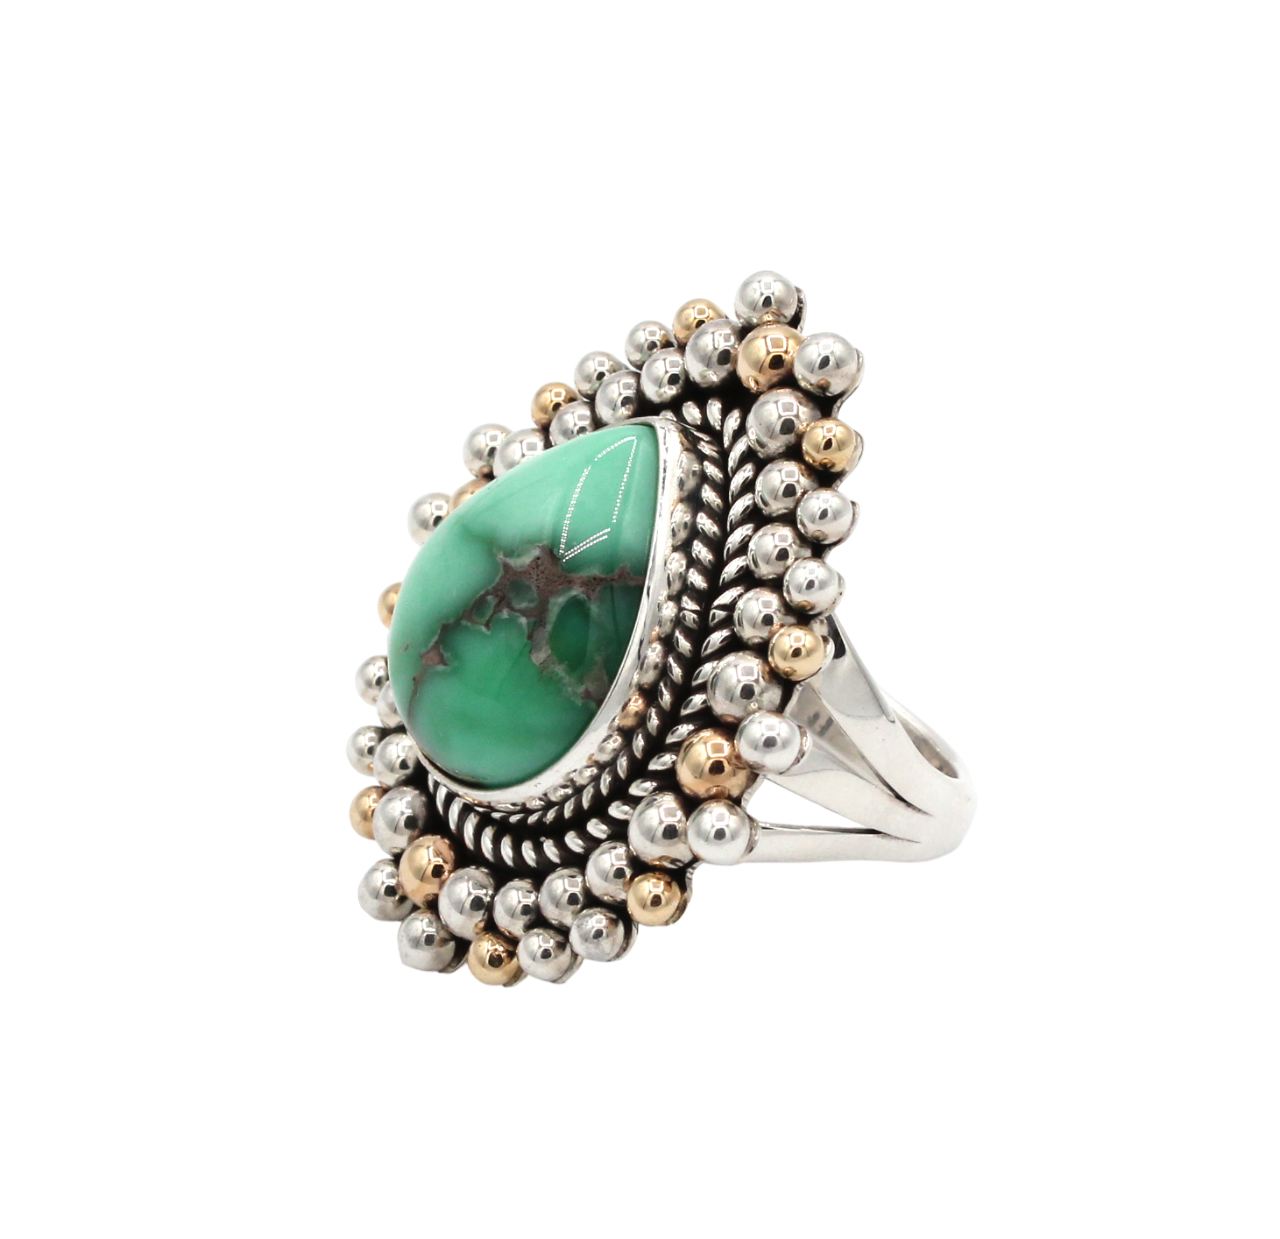 Damele Turquoise Ring-Jewelry-Artie Yellowhorse-Sorrel Sky Gallery